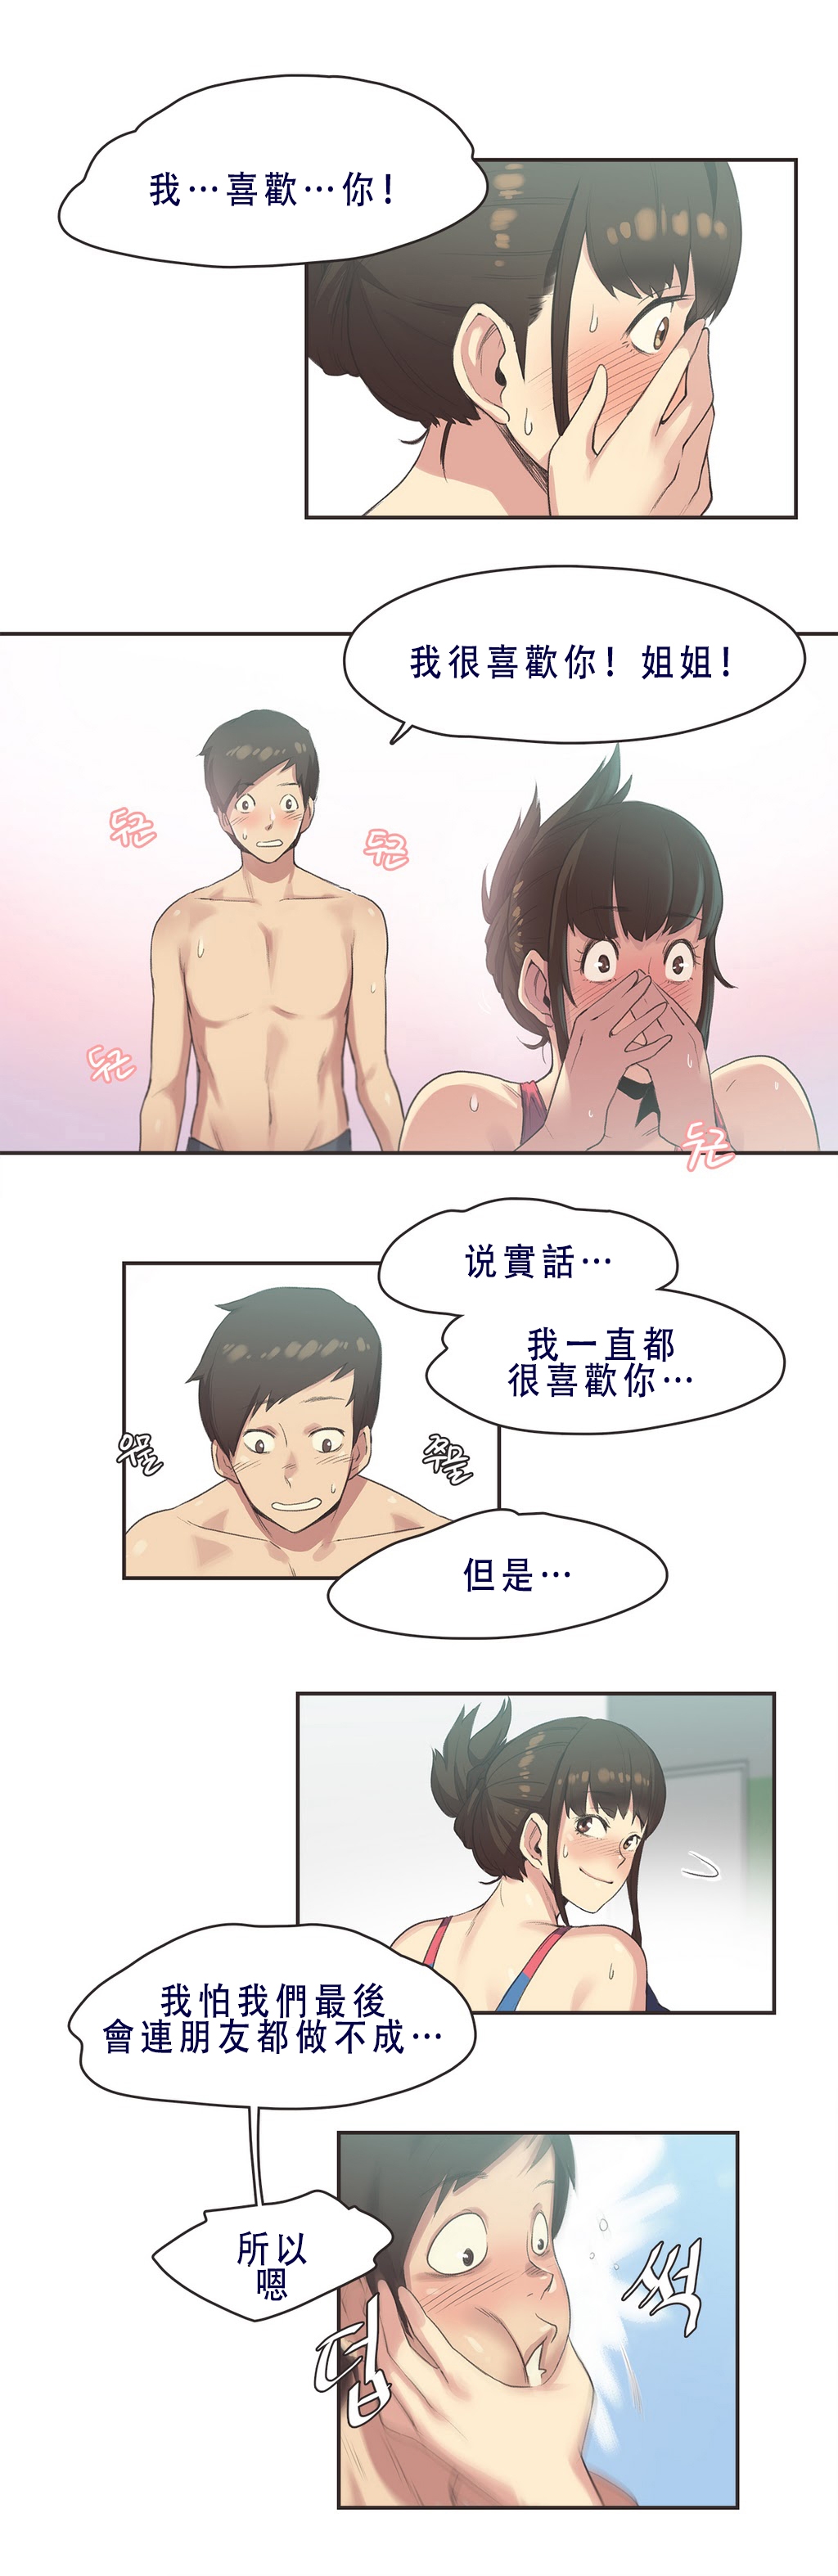 [Gamang] Sports Girl Ch.7 [Chinese] [高麗個人漢化] 5